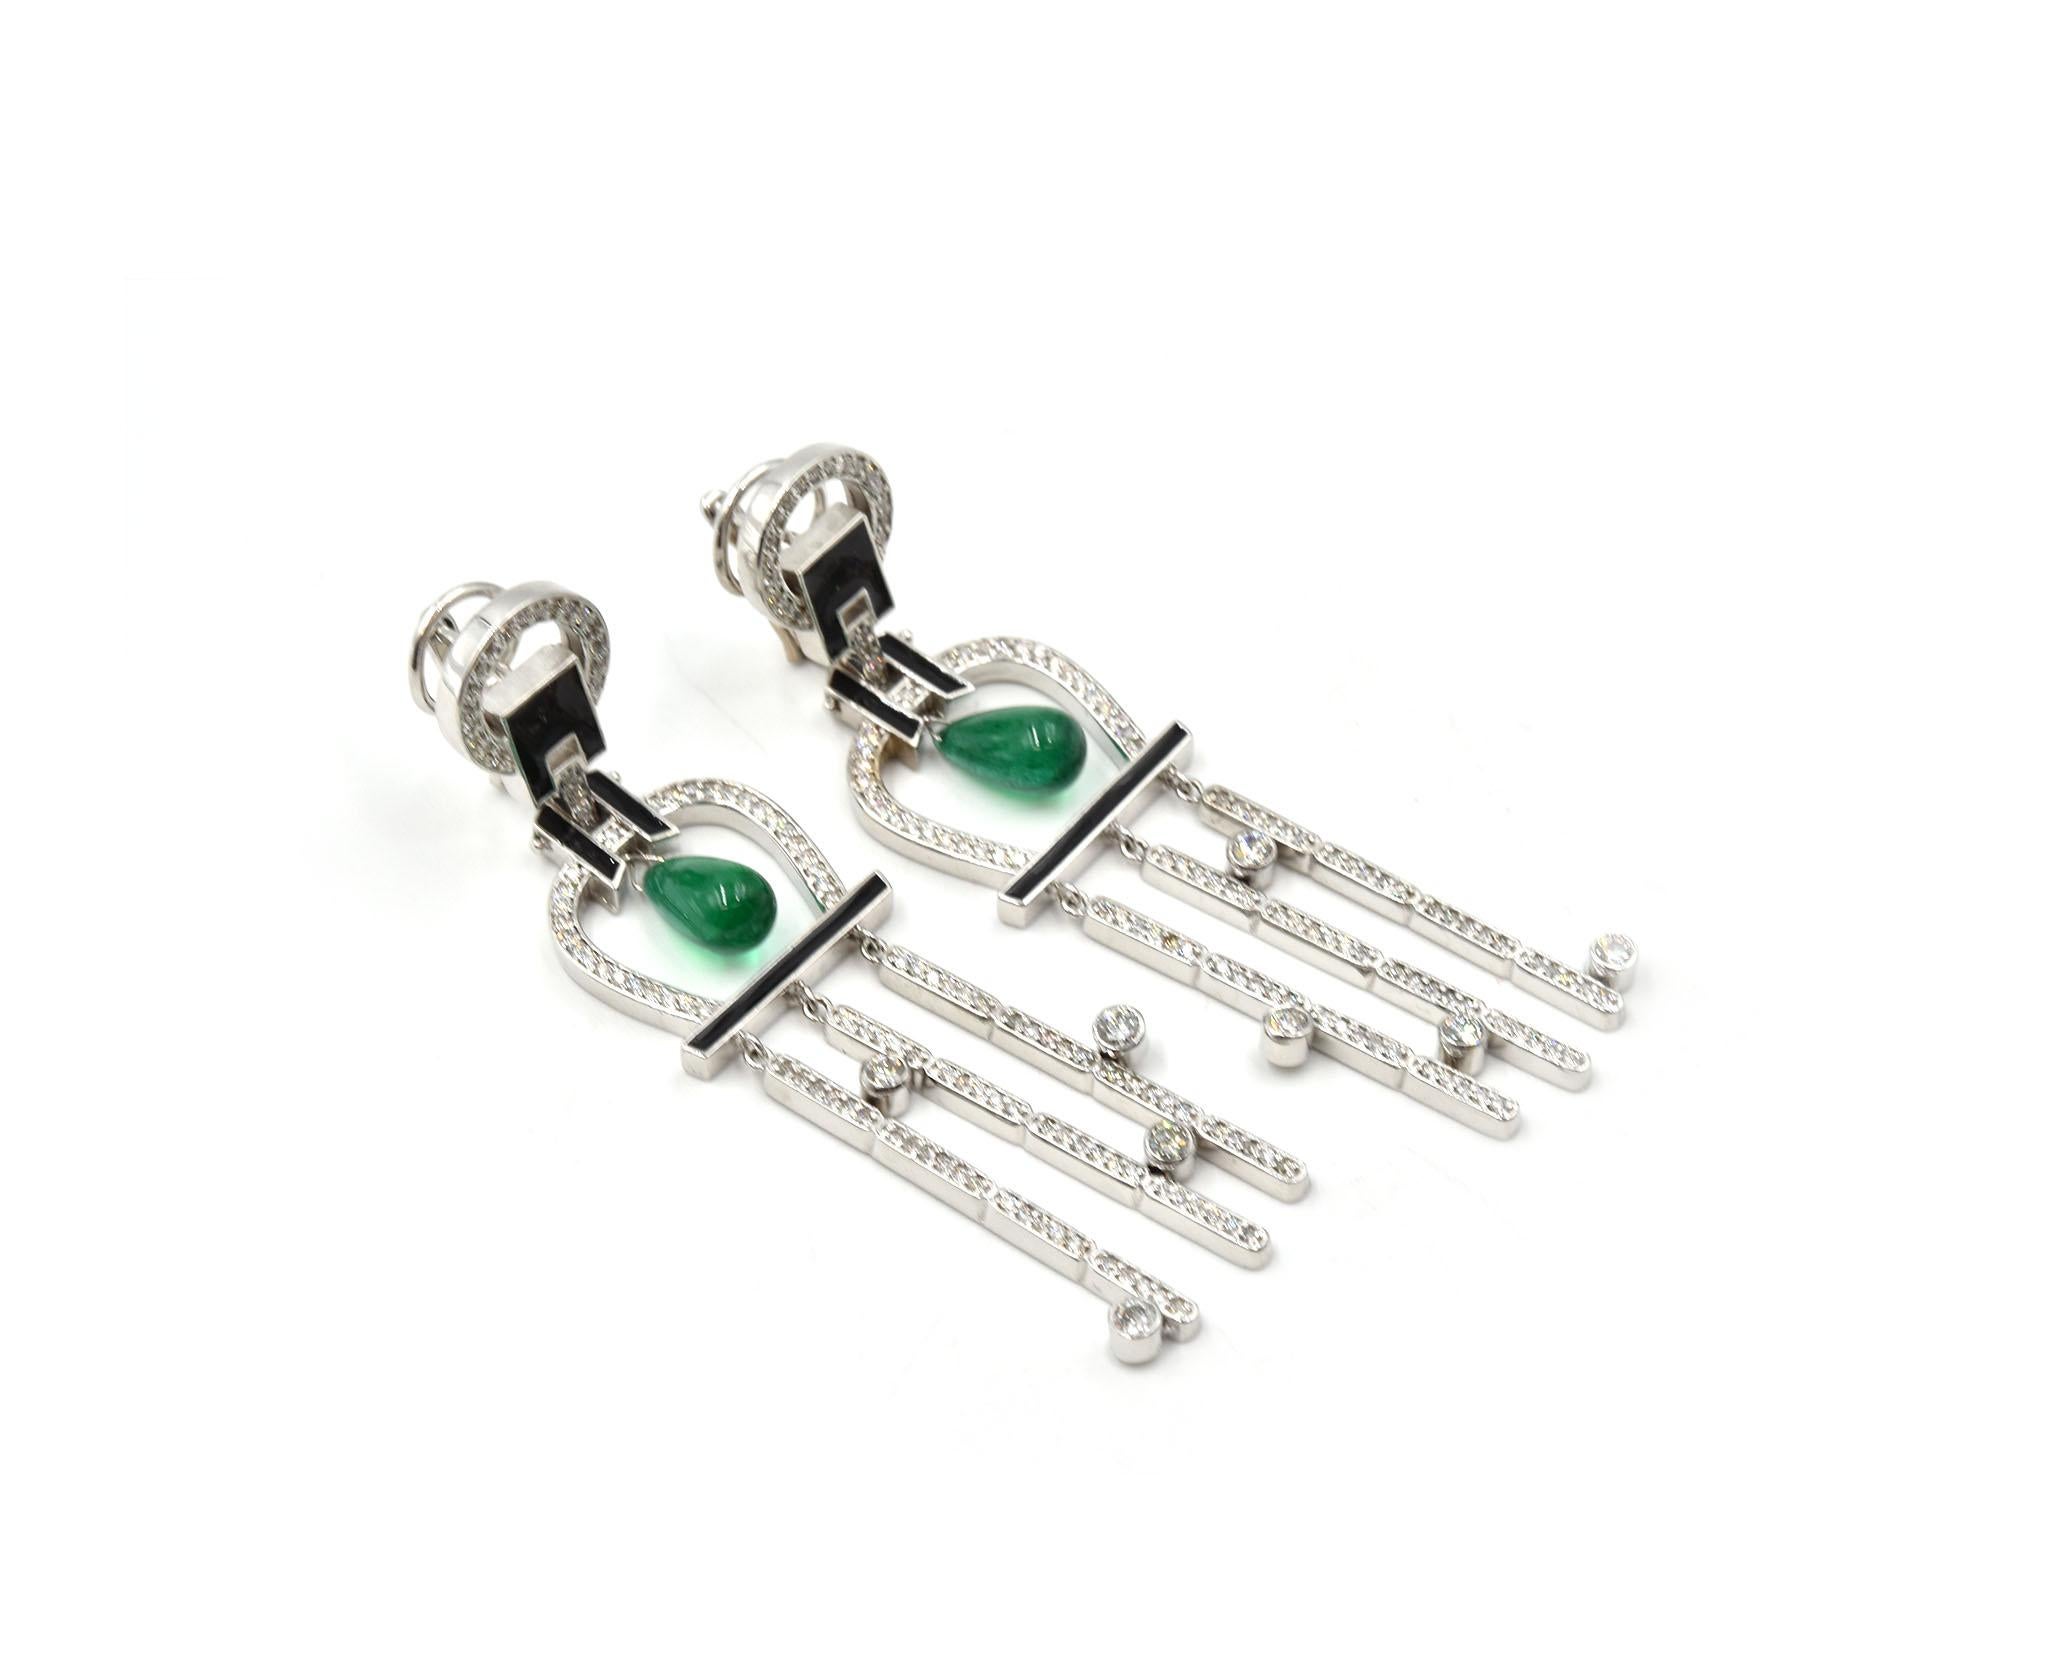 Designer: custom design
Material: 18k white gold
Emerald: two briolette cut emeralds = 4.35 carat weight
Diamonds: 244 round brilliant cut = 2.46 carat weight
Color: G-H
Clarity: SI1-SI2
Fastenings: omega backs
Dimensions: each earring is 2-inch